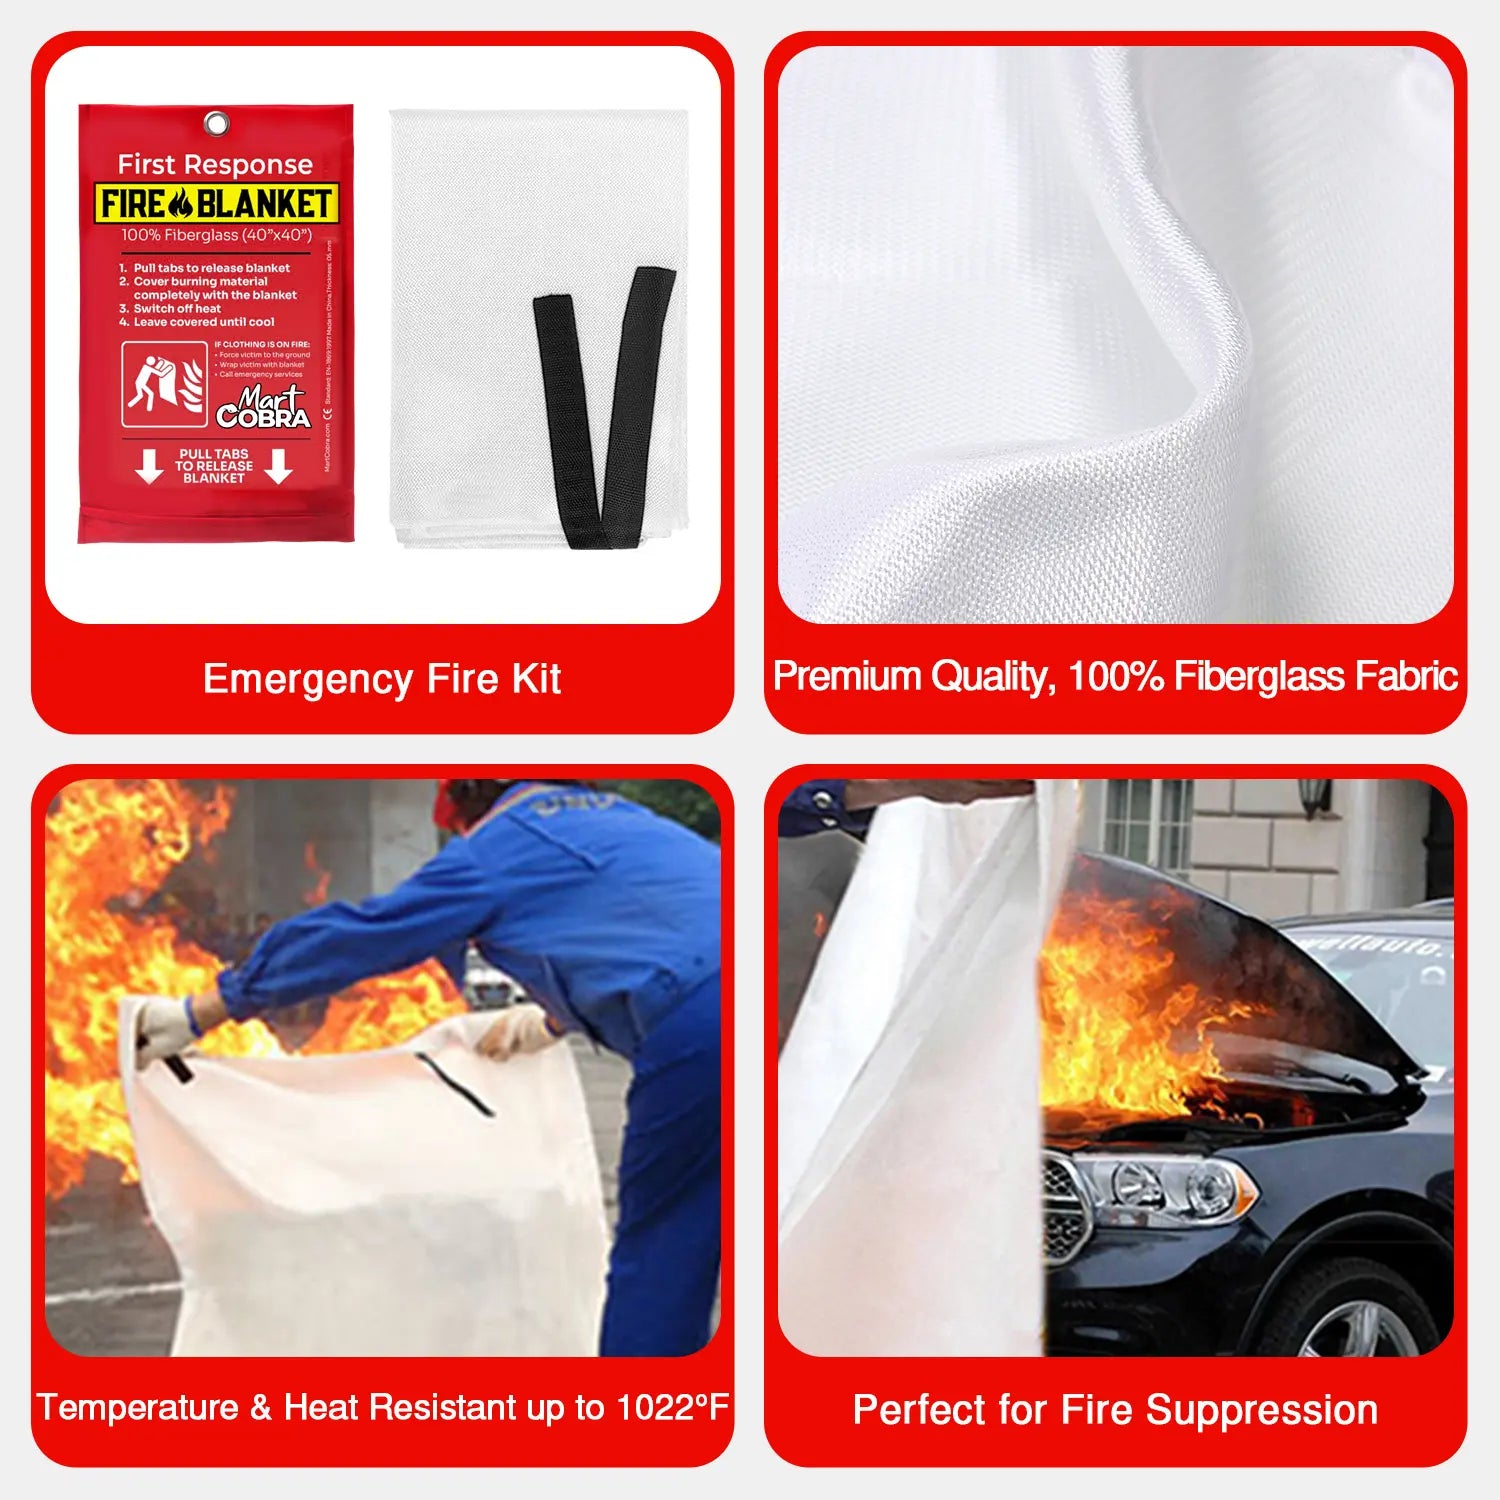 Mart Cobra 2-Pack Fire Blankets for Home Safety - Compact, Easy-to-Use, 40"x40" - Essential Emergency Gear